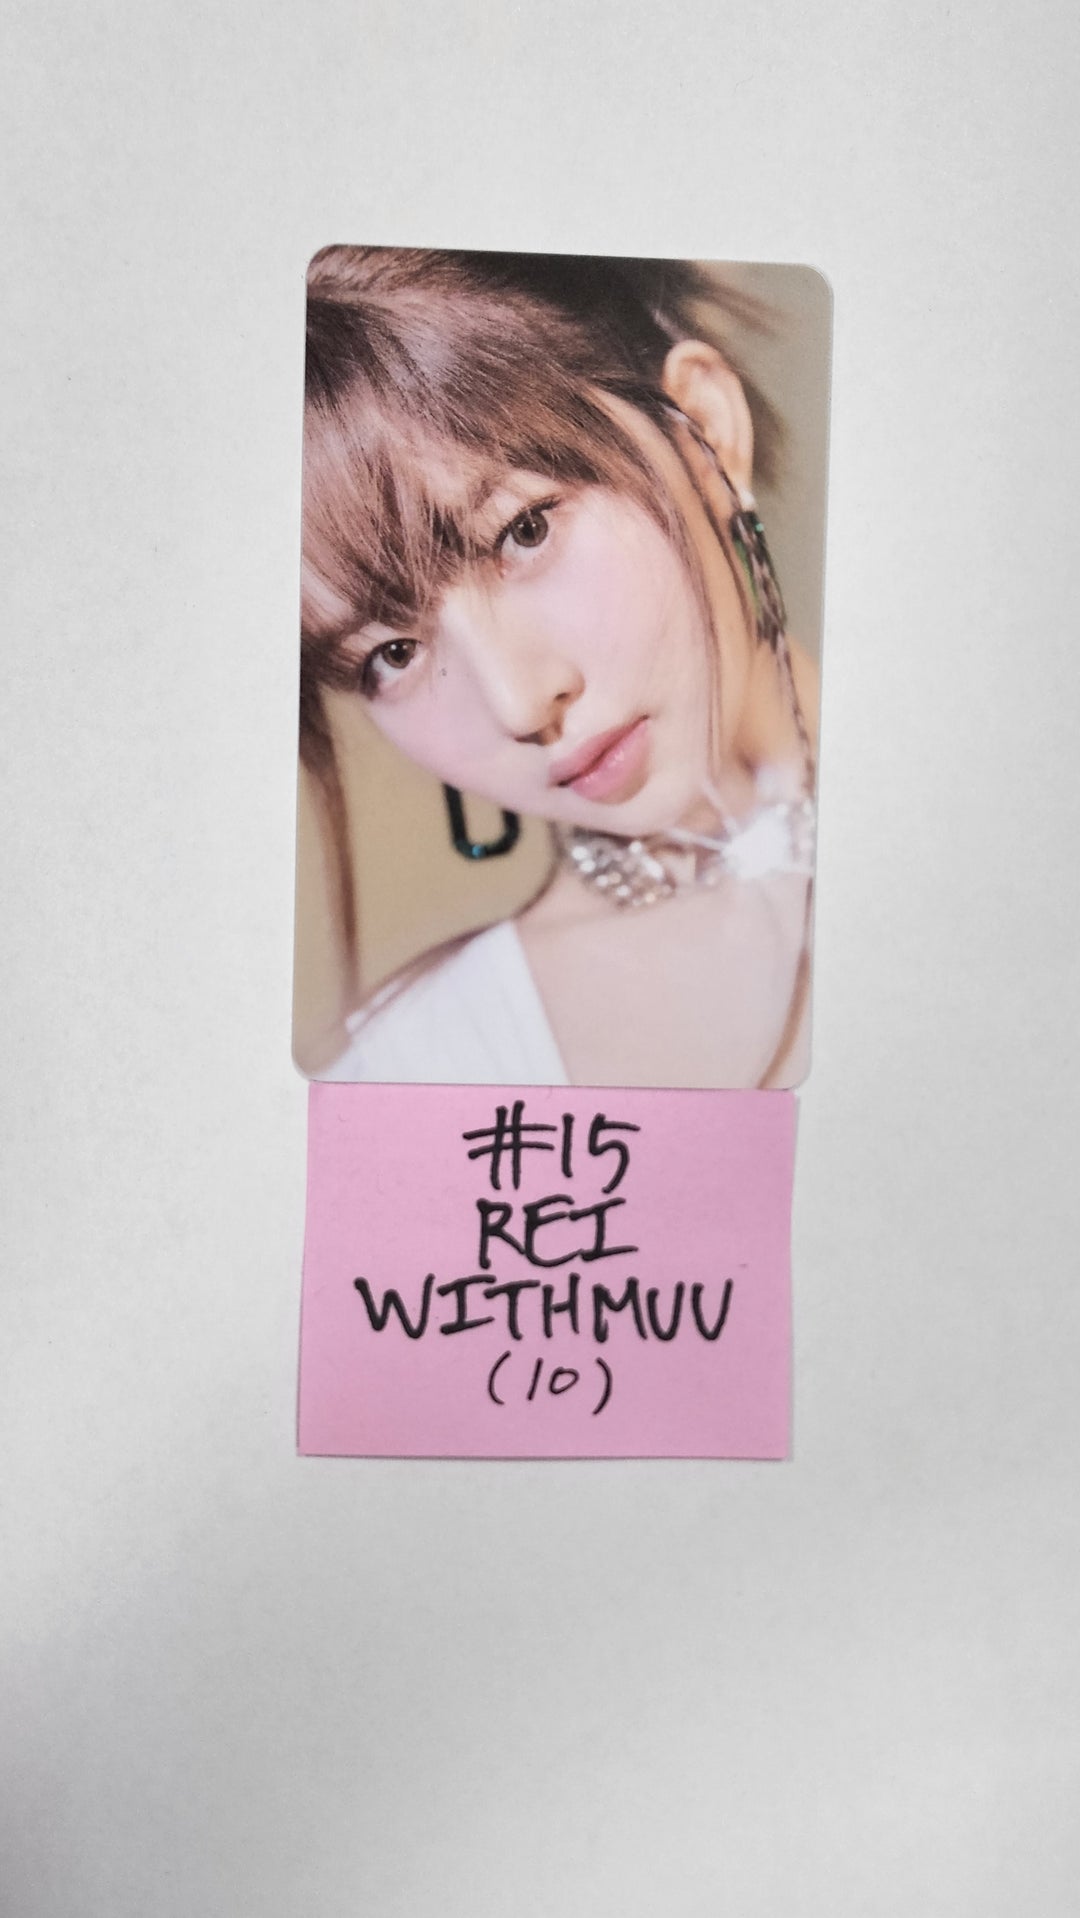 IVE 'After Like' - Withmuu Lucky Draw Event PVC Photocard